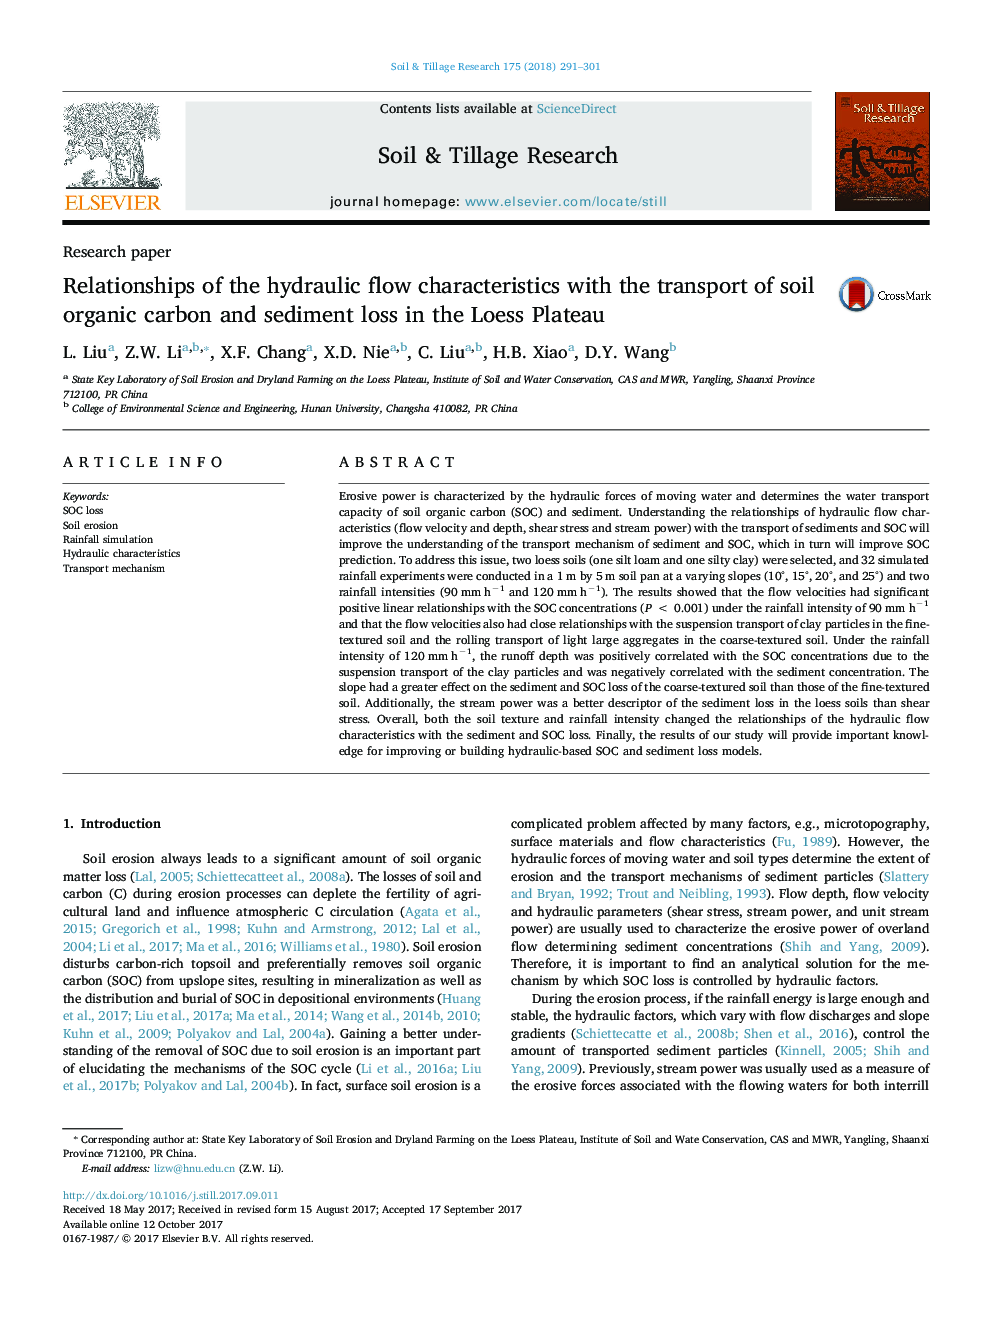 Research paperRelationships of the hydraulic flow characteristics with the transport of soil organic carbon and sediment loss in the Loess Plateau